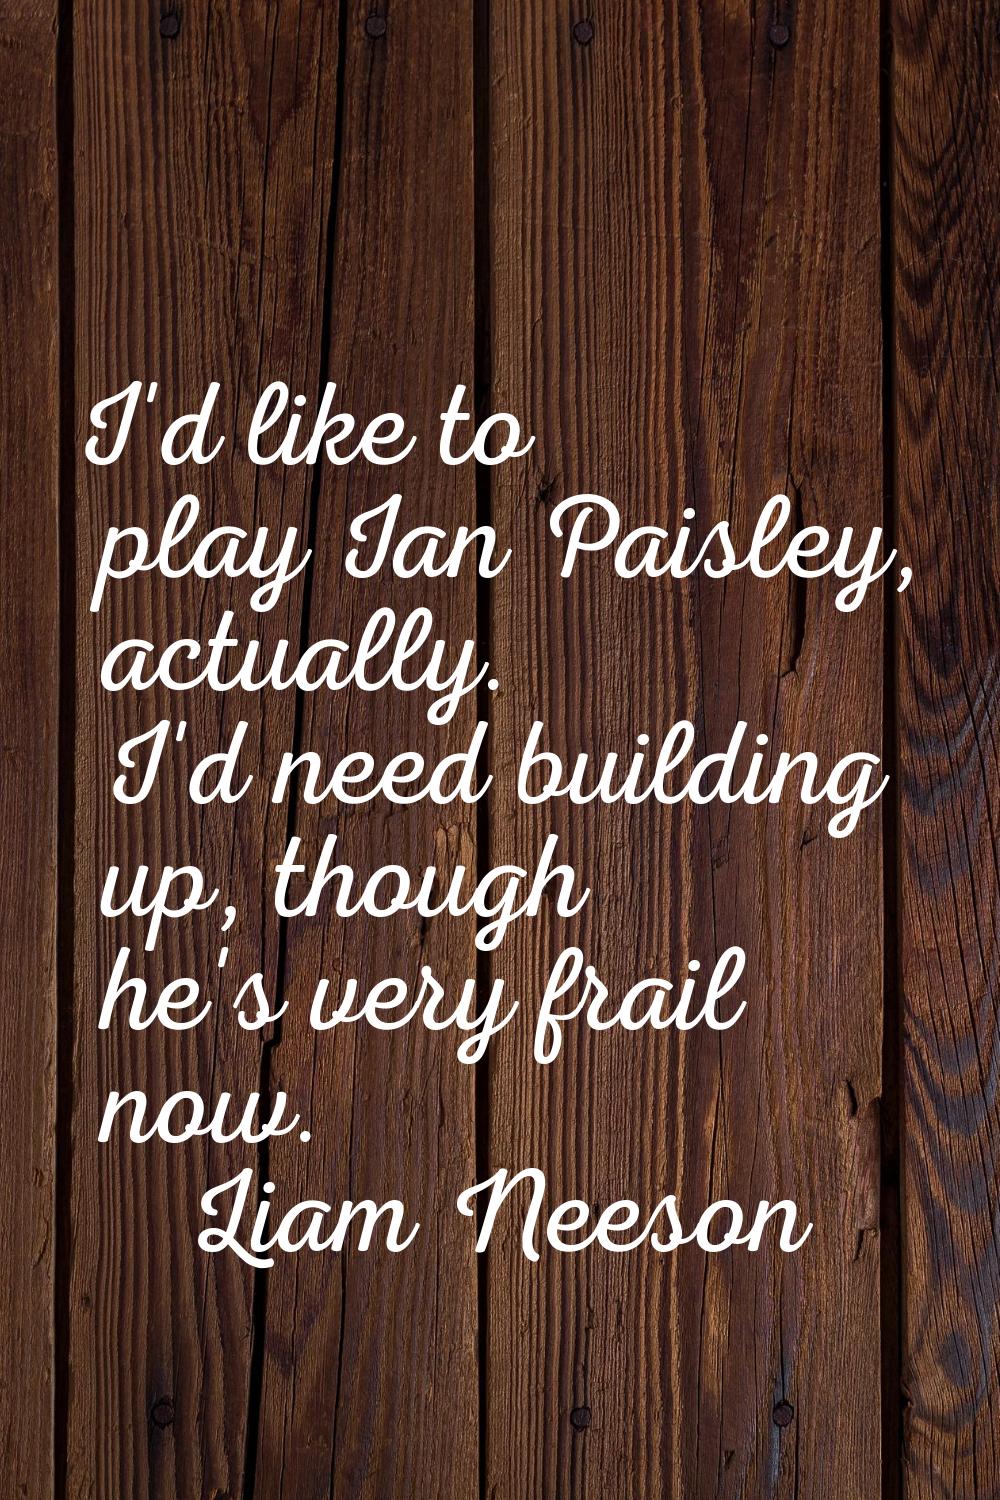 I'd like to play Ian Paisley, actually. I'd need building up, though he's very frail now.